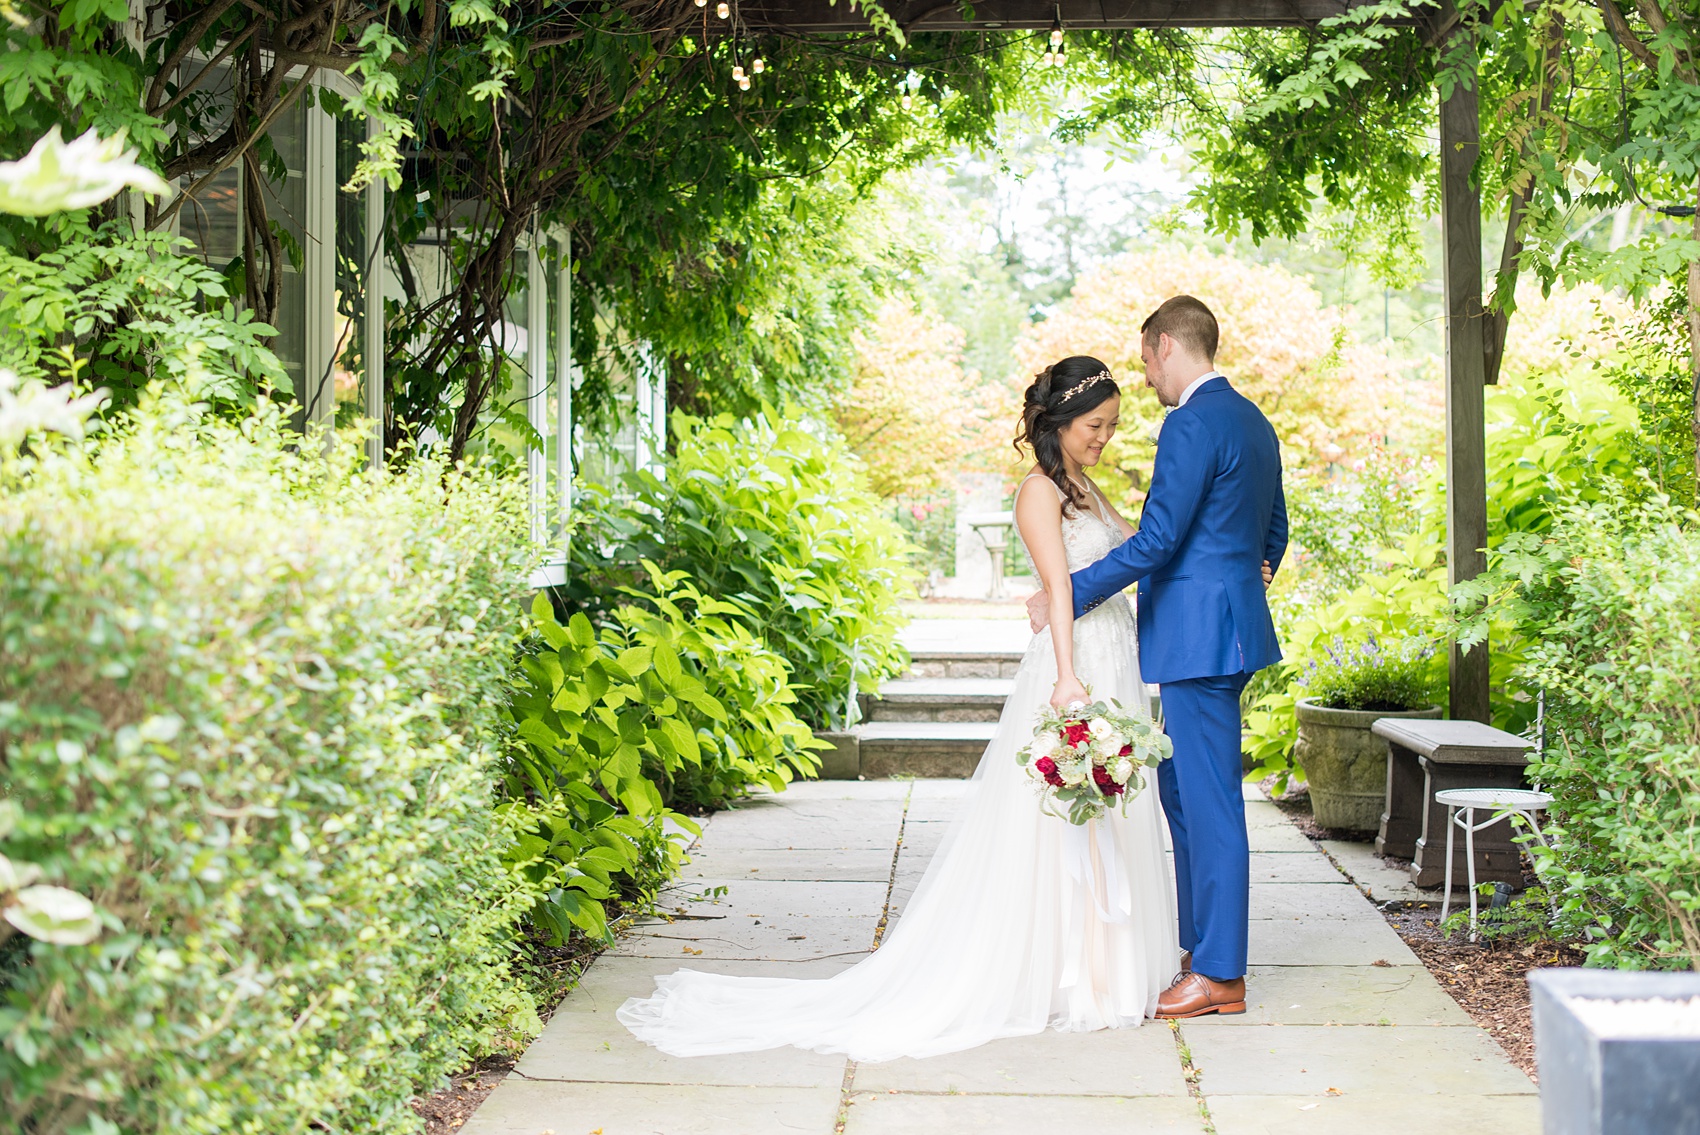 Wedding photos at Crabtree's Kittle House in Chappaqua, New York by Mikkel Paige Photography. This venue in Westchester county has the perfect elegance of a rustic home and garden very close to NYC. The bride wore a gown from BHLDN and groom a custom blue Indochino suit. #bluesuit #BHLDNgown #mikkelpaige #CrabtreesKittleHouse #WestchesterWeddingVenues #WestchesterWedding #summerwedding 